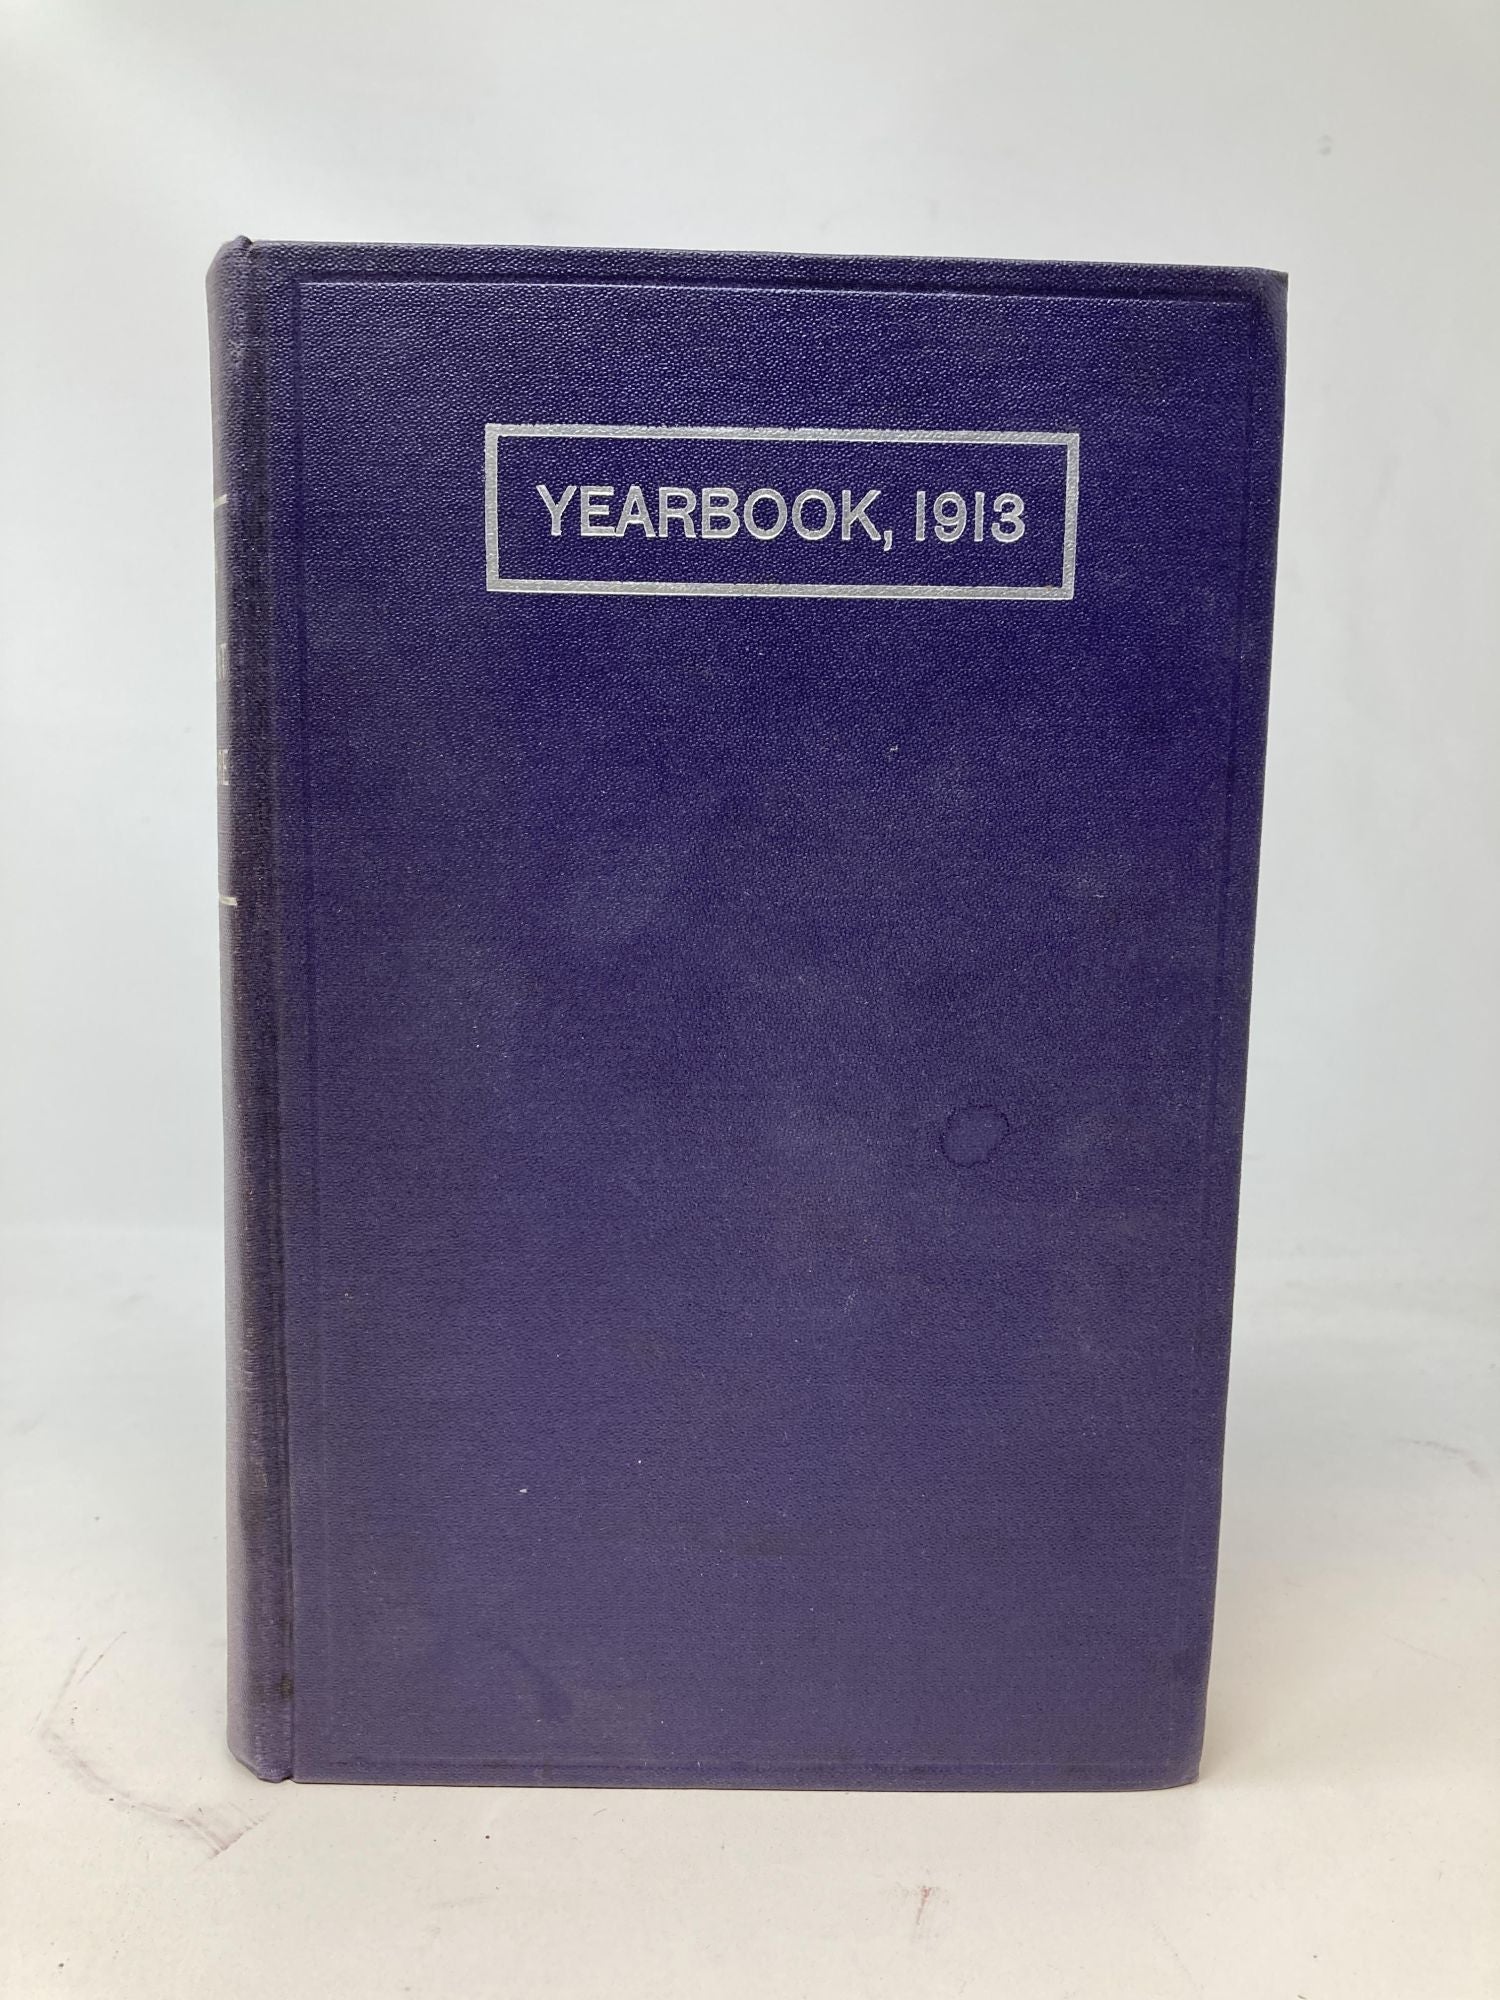 USDA - Yearbook of the United States Department of Agriculture - 1913